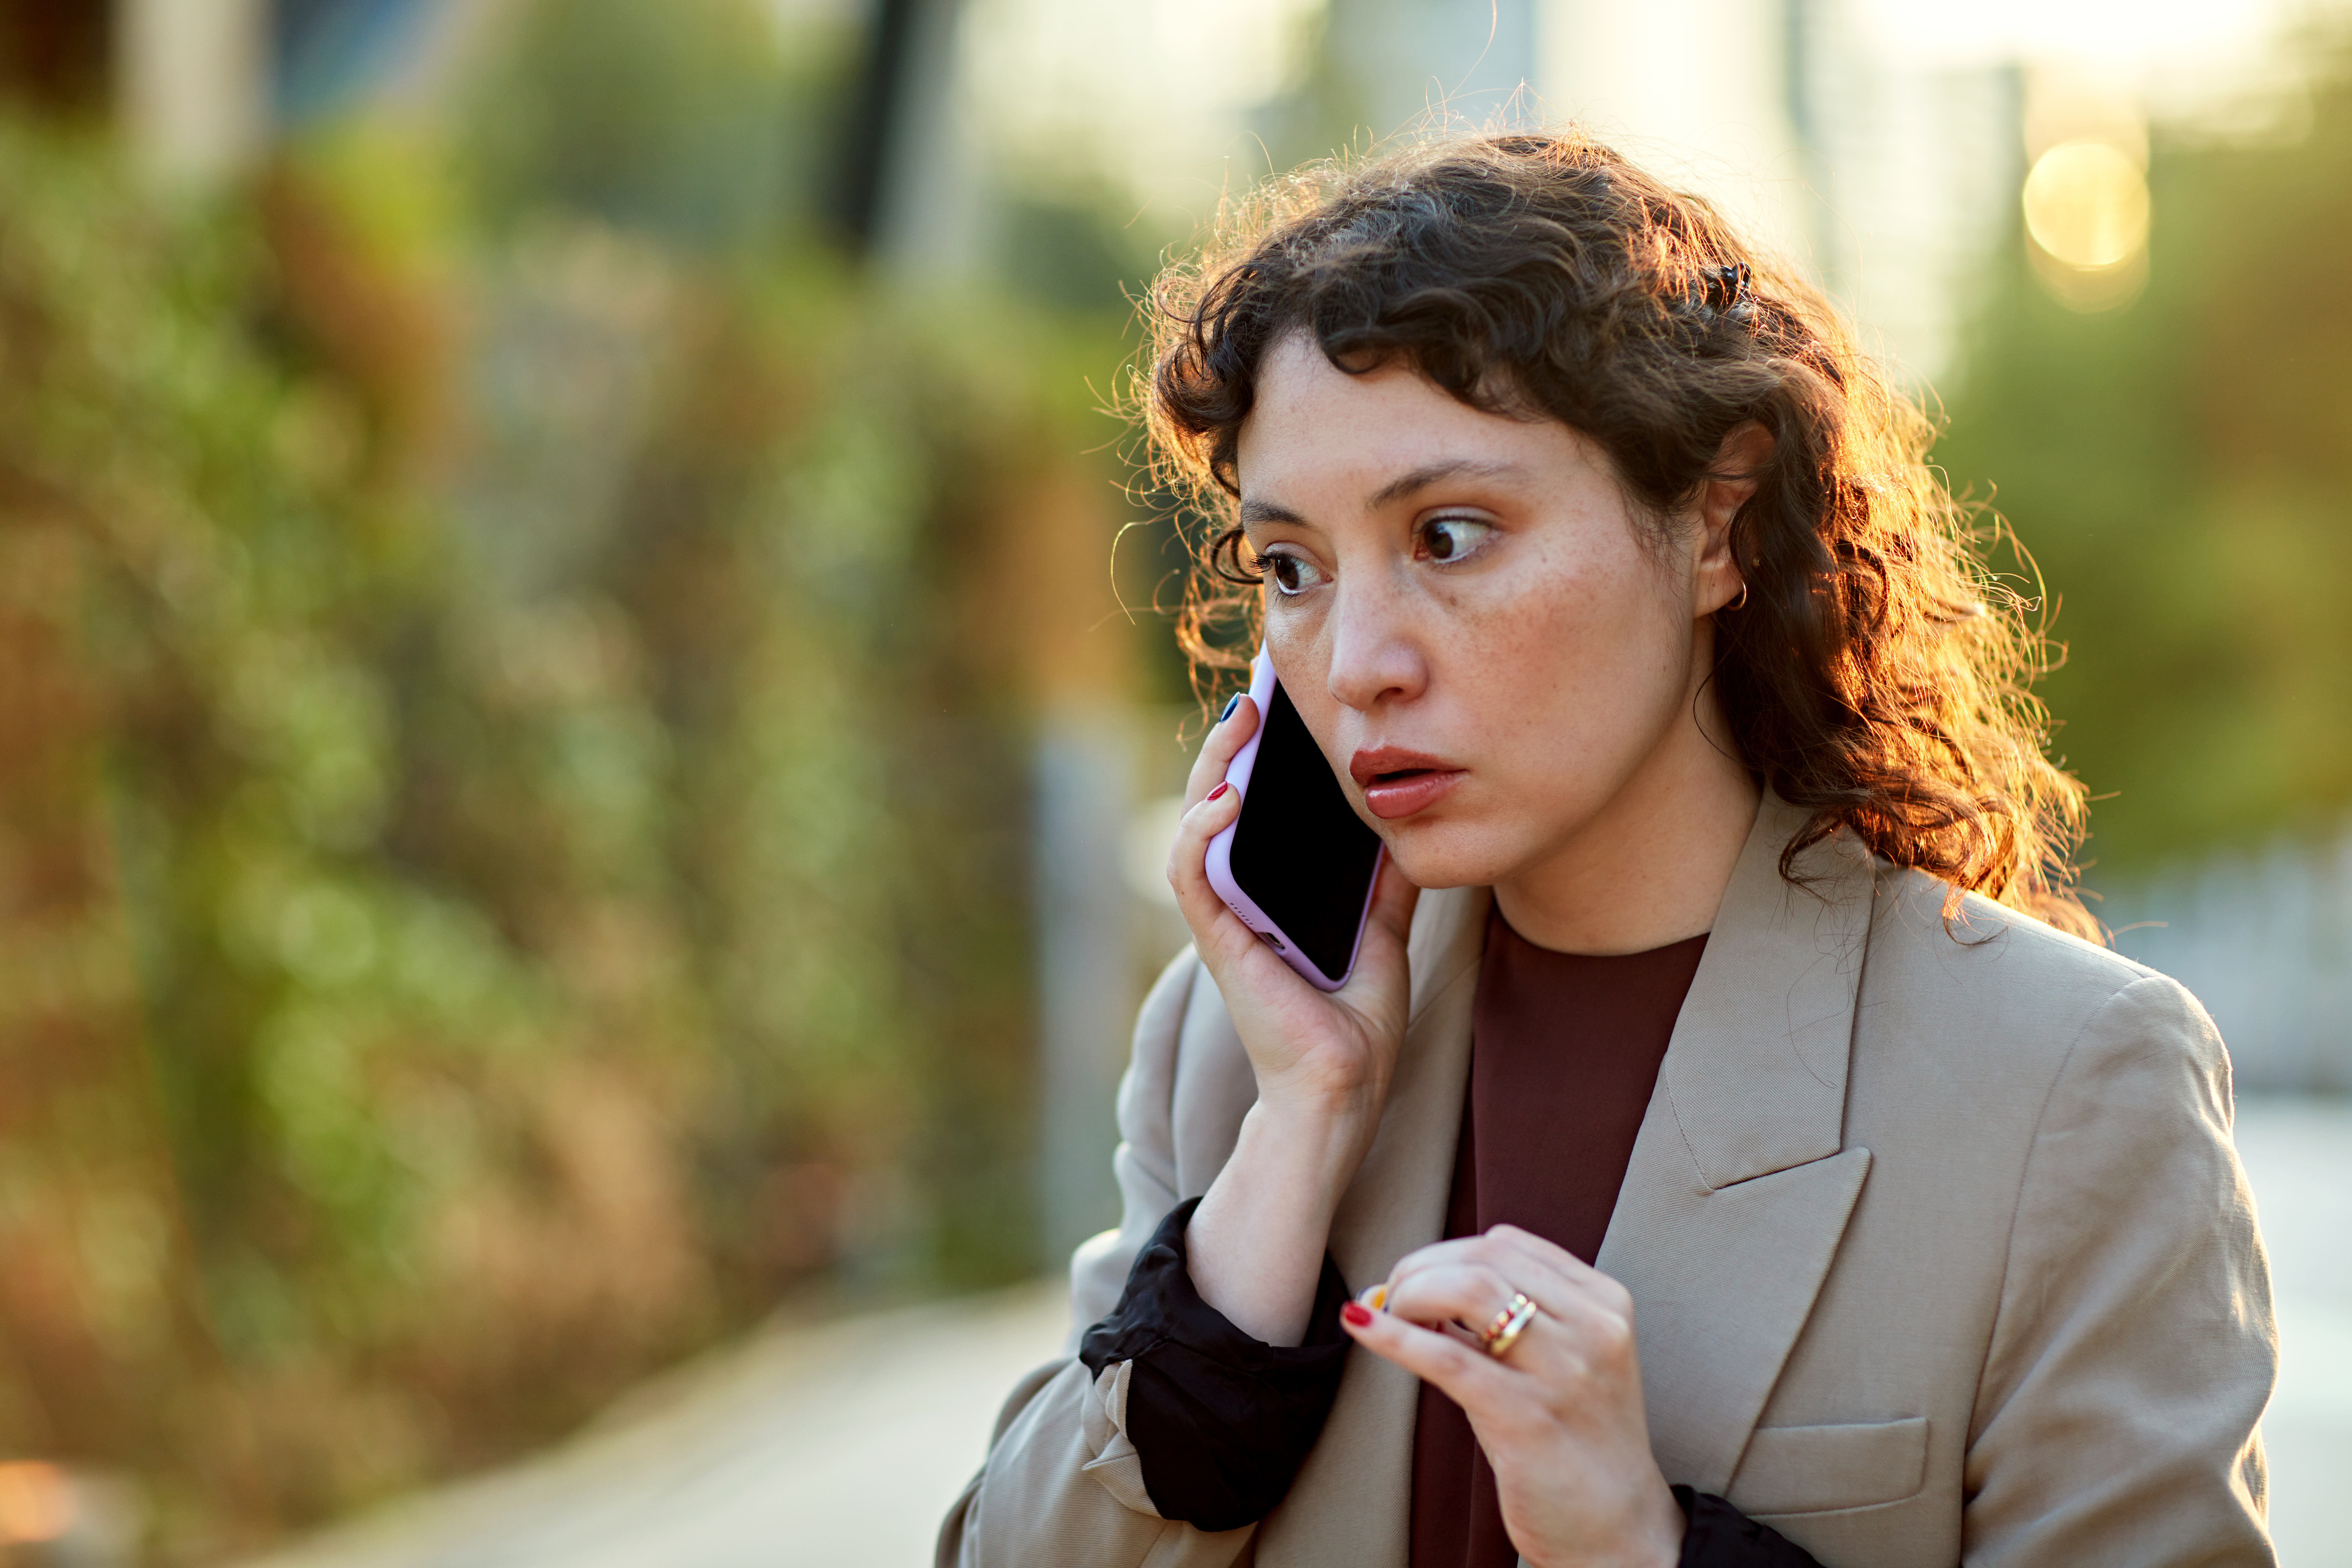 Concerned businesswoman using phone outdoors | Source: Getty Images